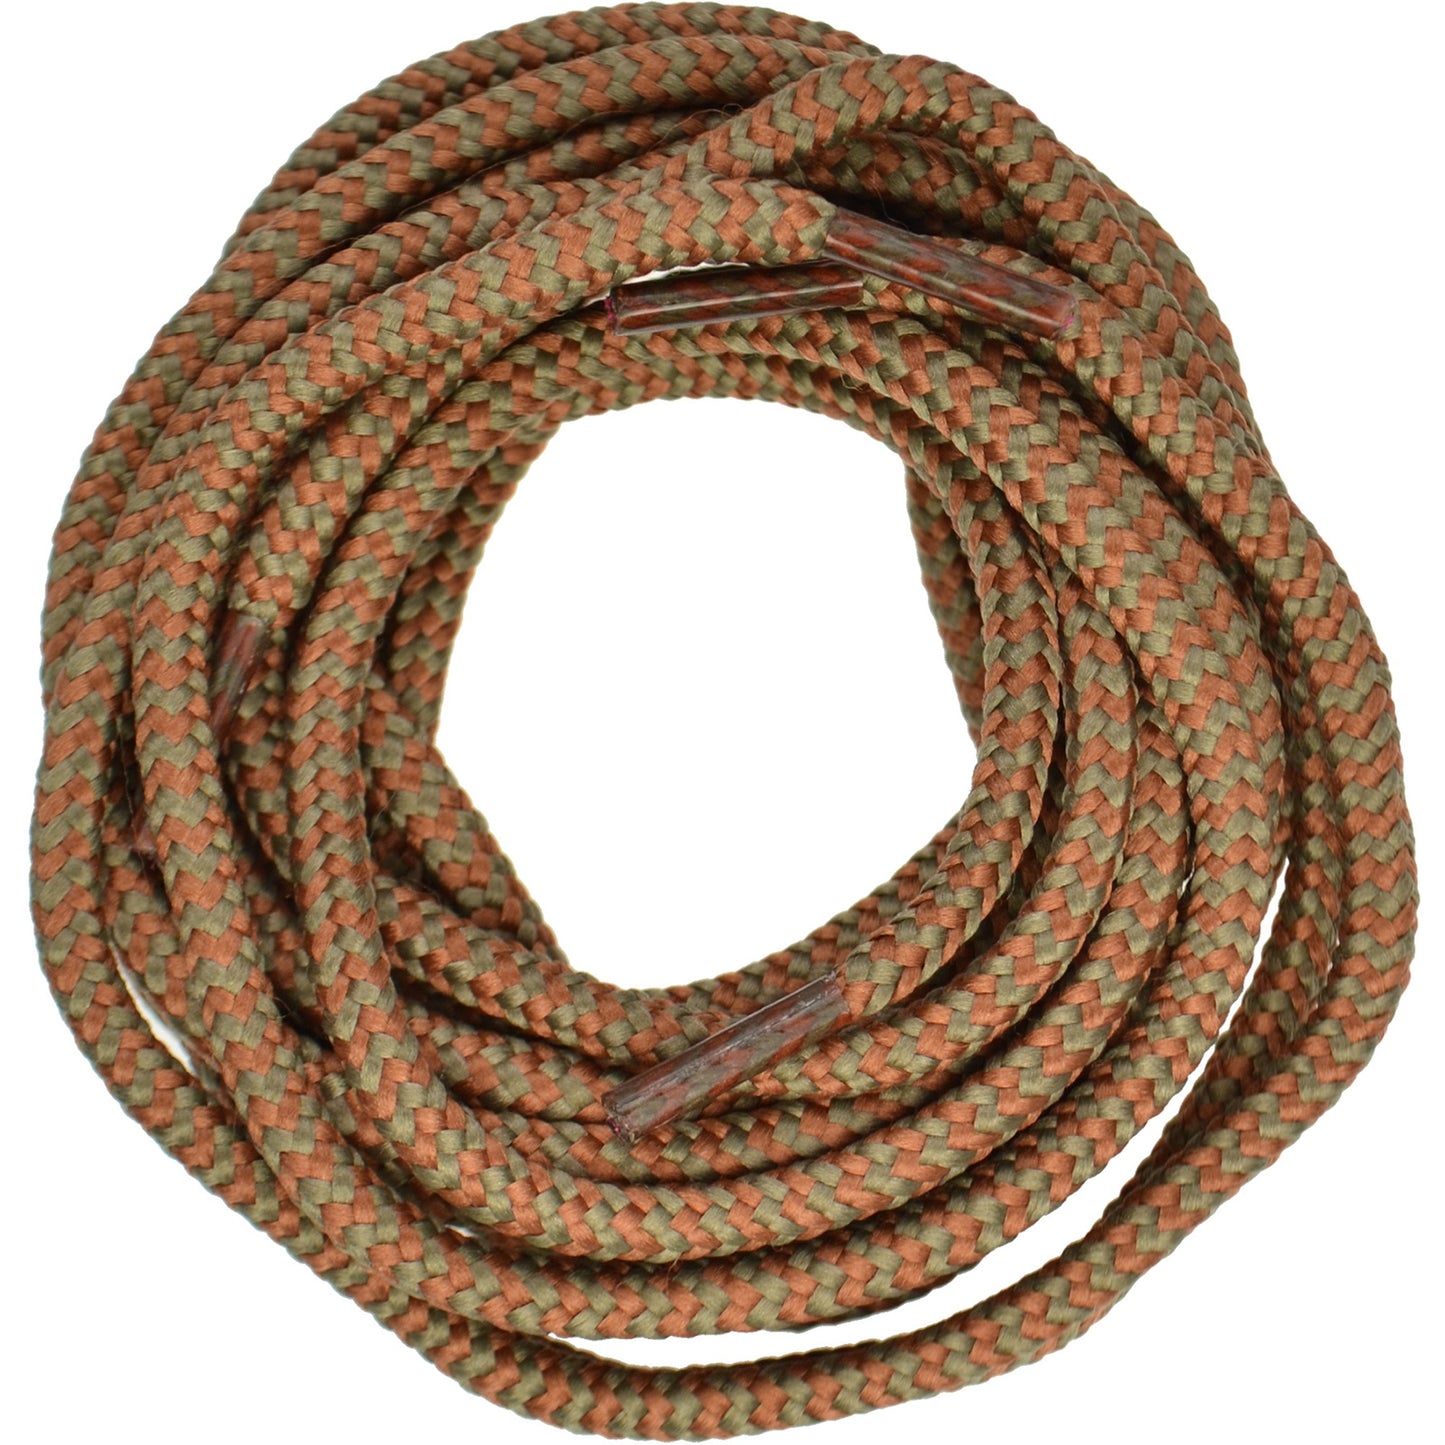 150cm Walking Boot Shoe Laces - Khaki and Tan Dog Tooth